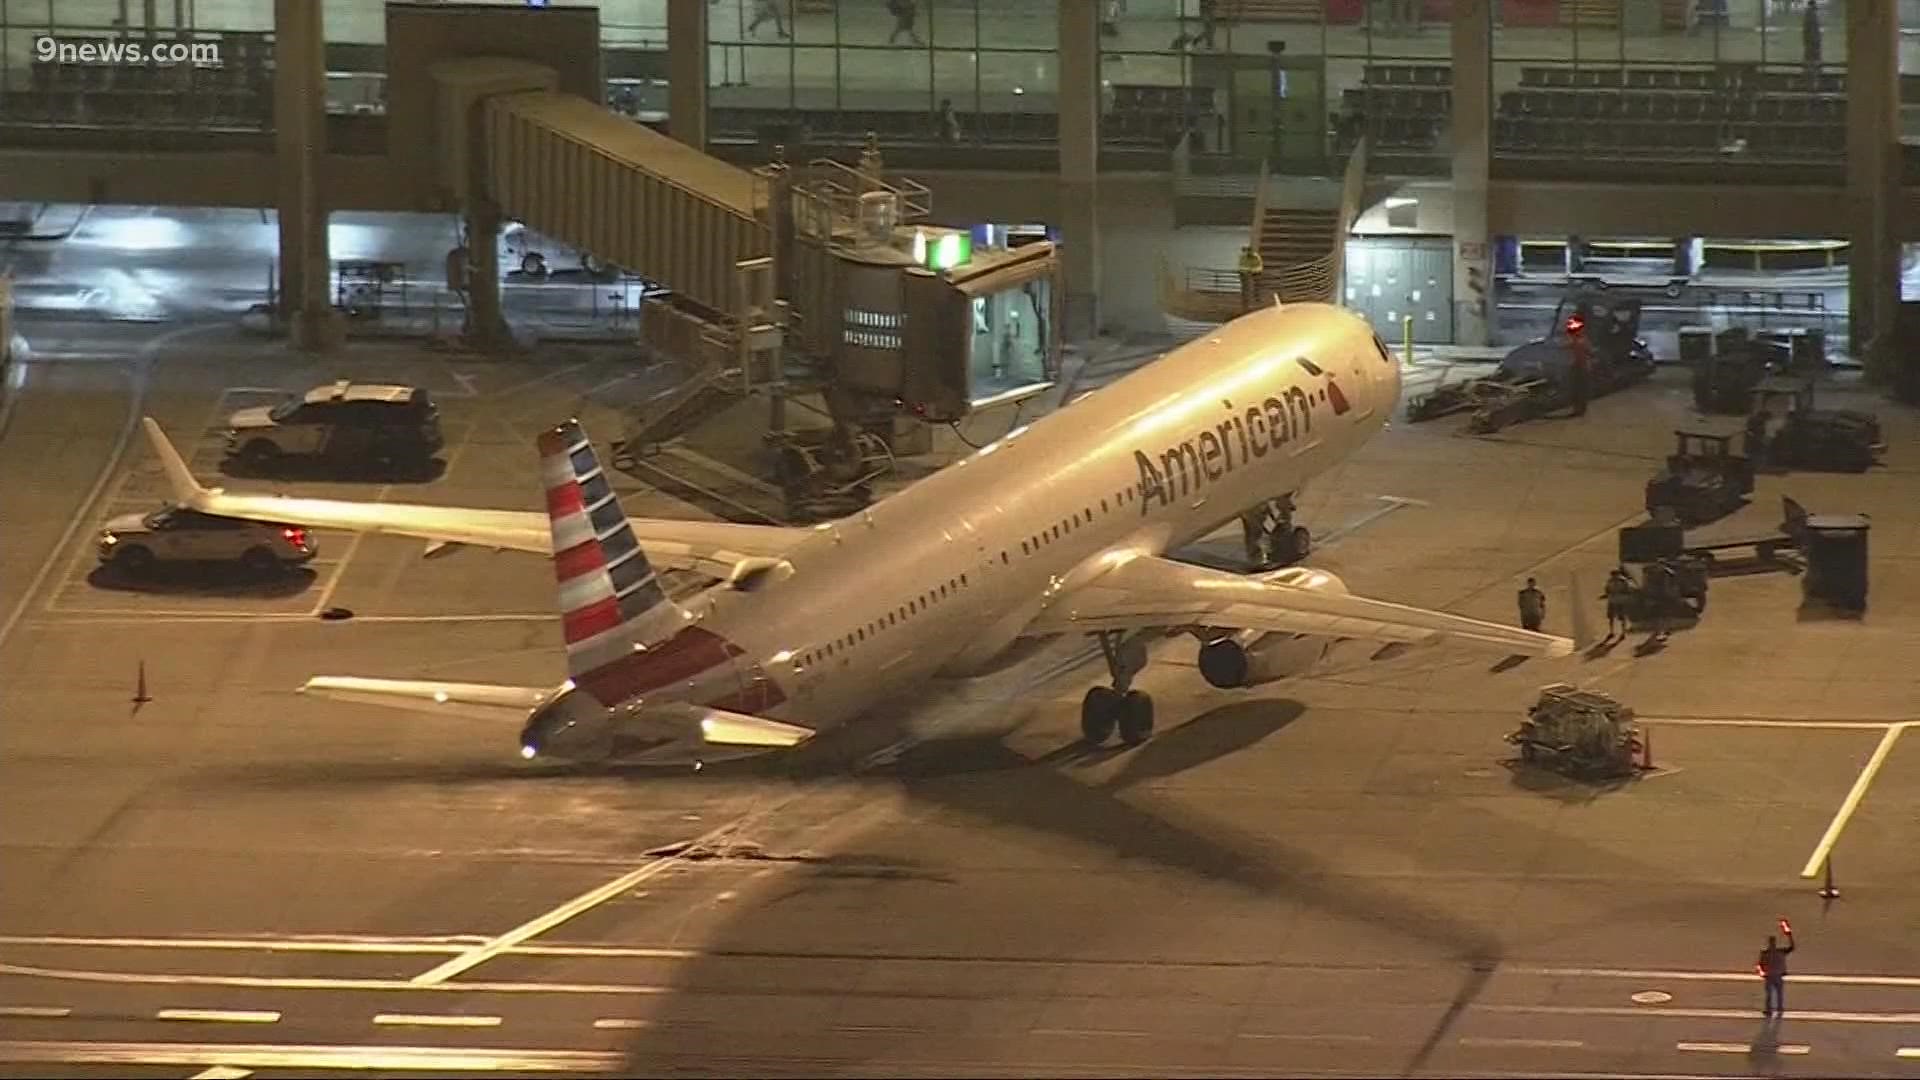 A flight from New York to California was diverted to Denver after a passenger physically assaulted a flight attendant, according to American Airlines.